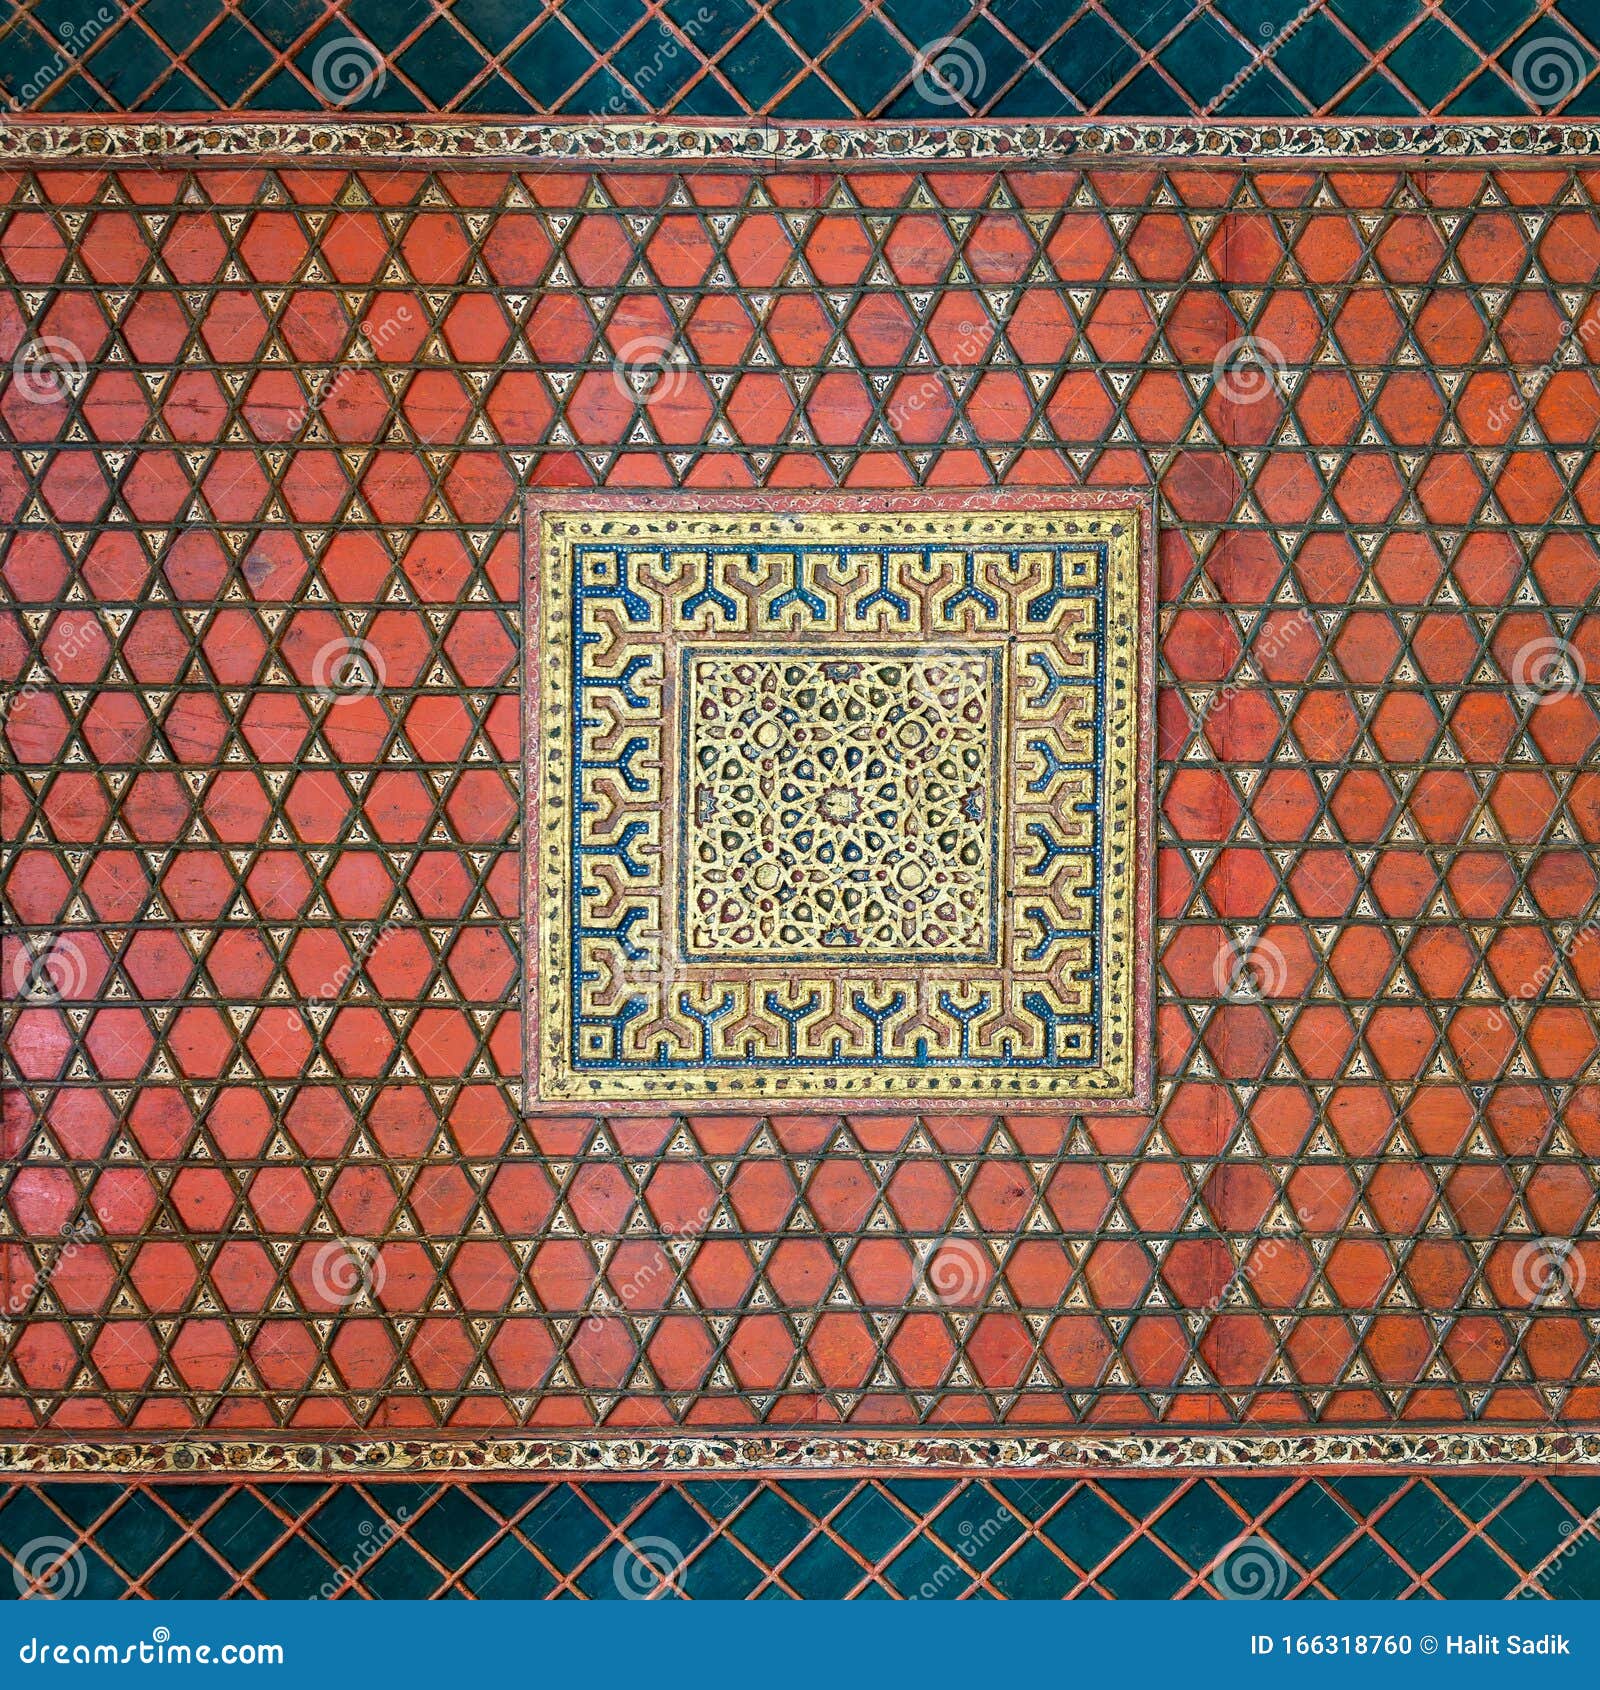 wooden ceiling decorated with red and blue floral patterns, mamluk era amir taz palace, cairo, egypt